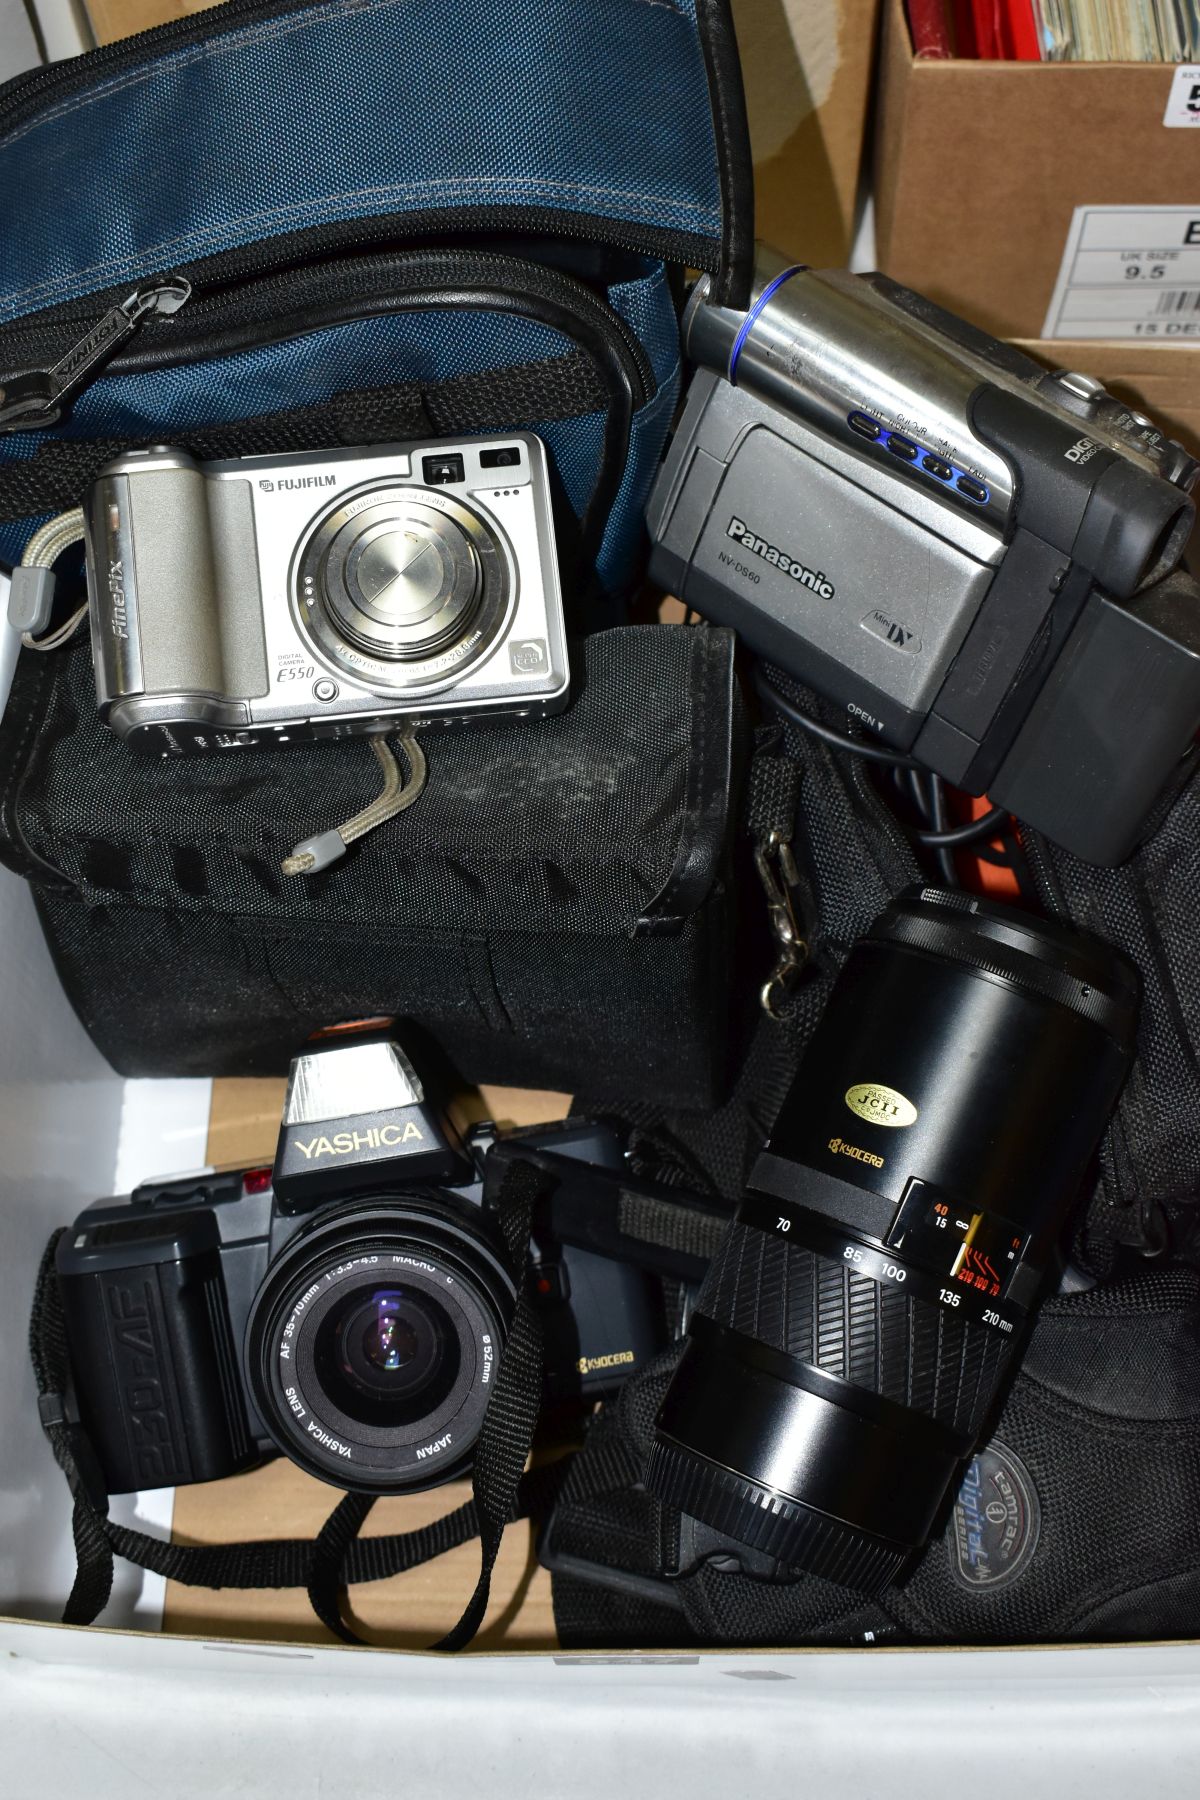 PHOTOGRAPHIC AND VIDEO EQUIPMENT, ETC, to include a Yashica 230 AF 35mm SLR film camera, Yashica